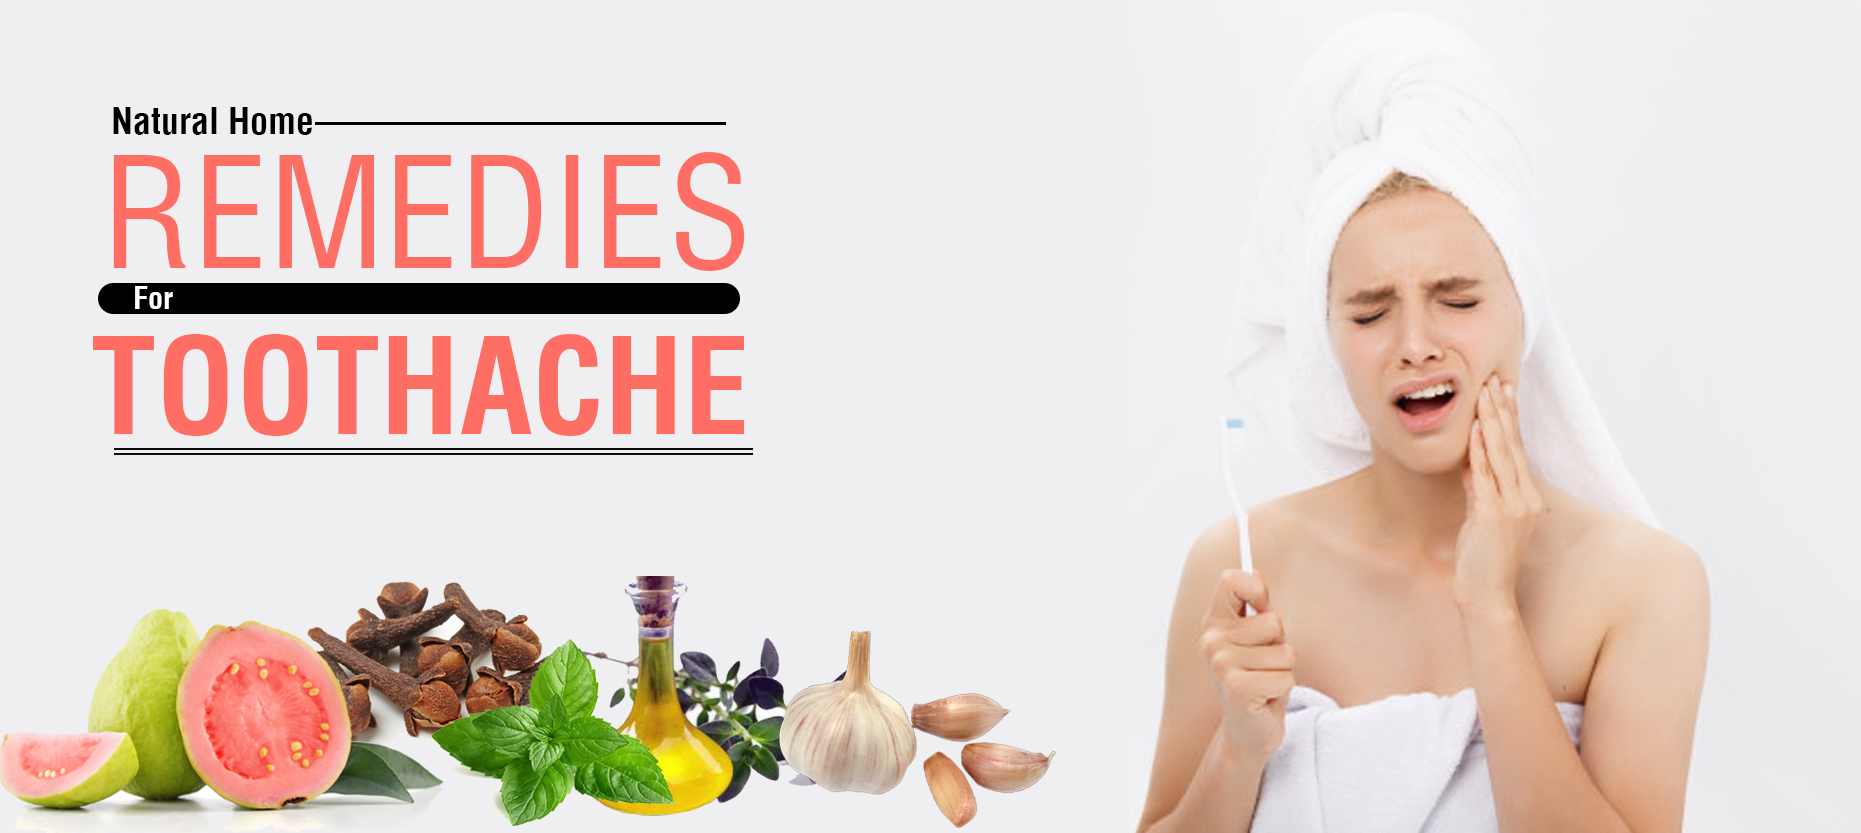 Natural Remedies for Toothache